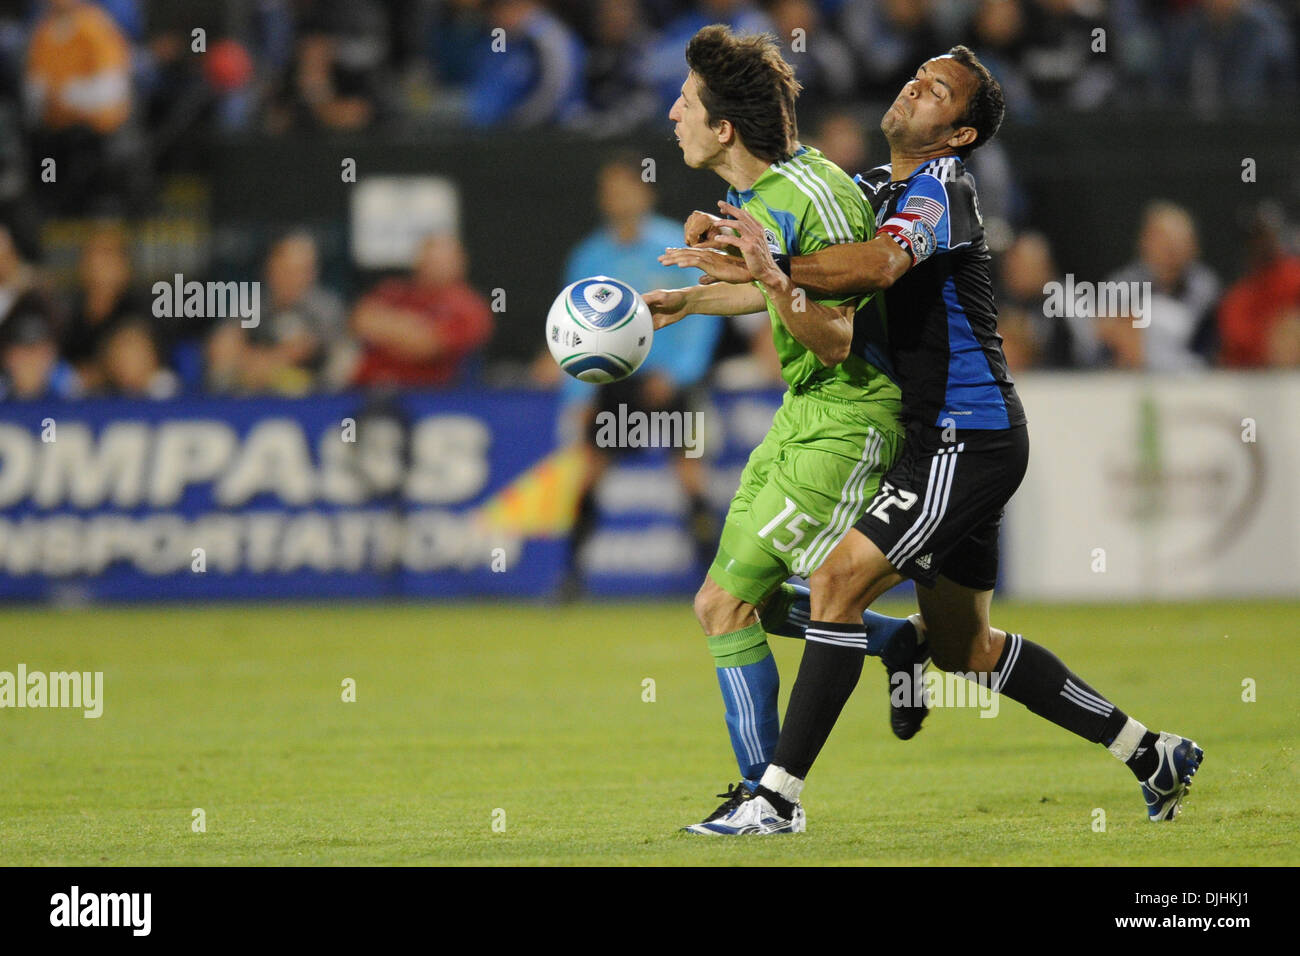 July 31, 2010 - Santa Clara, California, United States of America - 31 July 2010: San Jose Earthquakes M Ramiro Corrales (12) fouls Seattle Sounders M Alvaro Fernandez (15) during the MLS match between the San Jose Earthquakes and Seattle Sounders at Buck Shaw Stadium in Santa Clara, CA.  The visiting Sounders won 1-0 and picked up the second annual Heritage Cup..Mandatory Credit:  Stock Photo